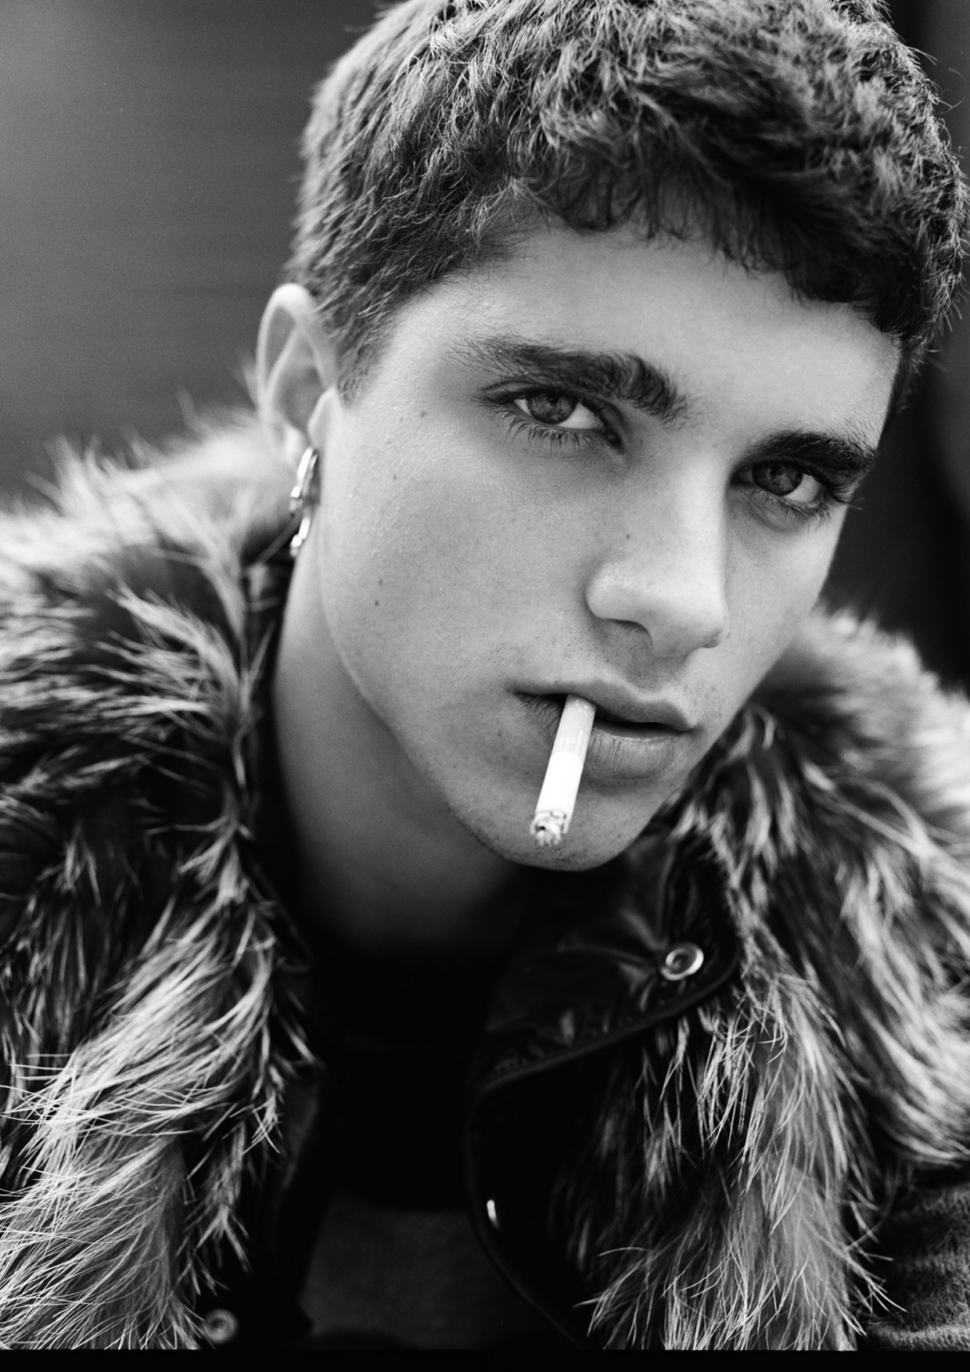 Mateo Videla at NY Models by Hadar Pitchon for Client U.S. #10 | Client ...